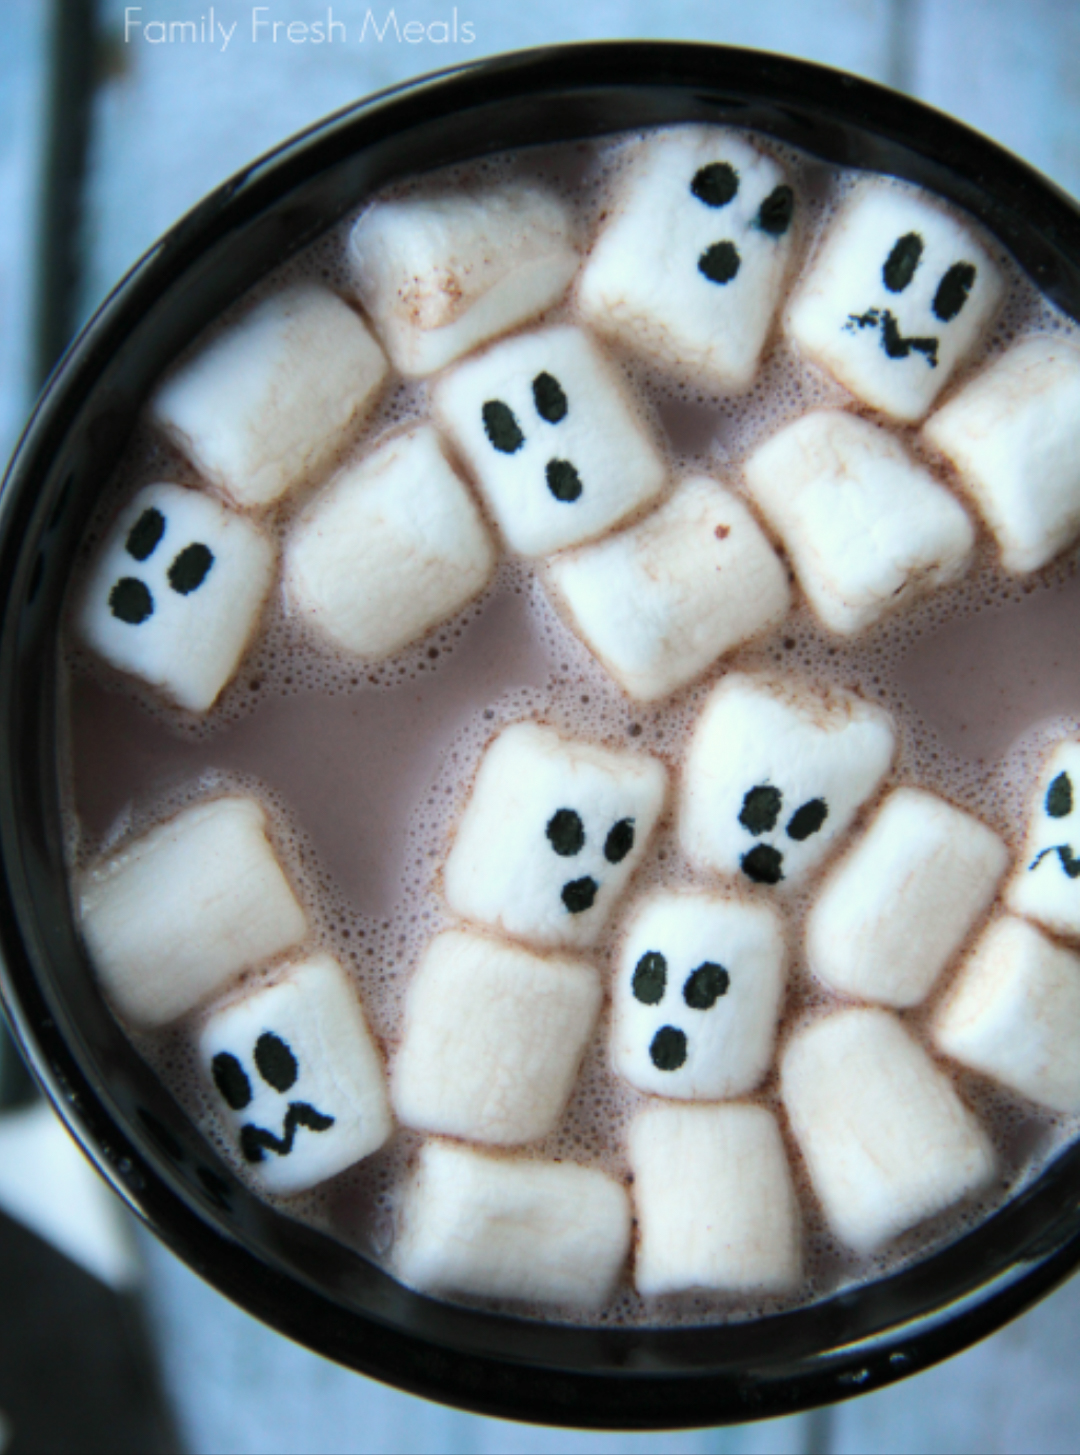 Marshmallows with ghost faces in hot cocoa.